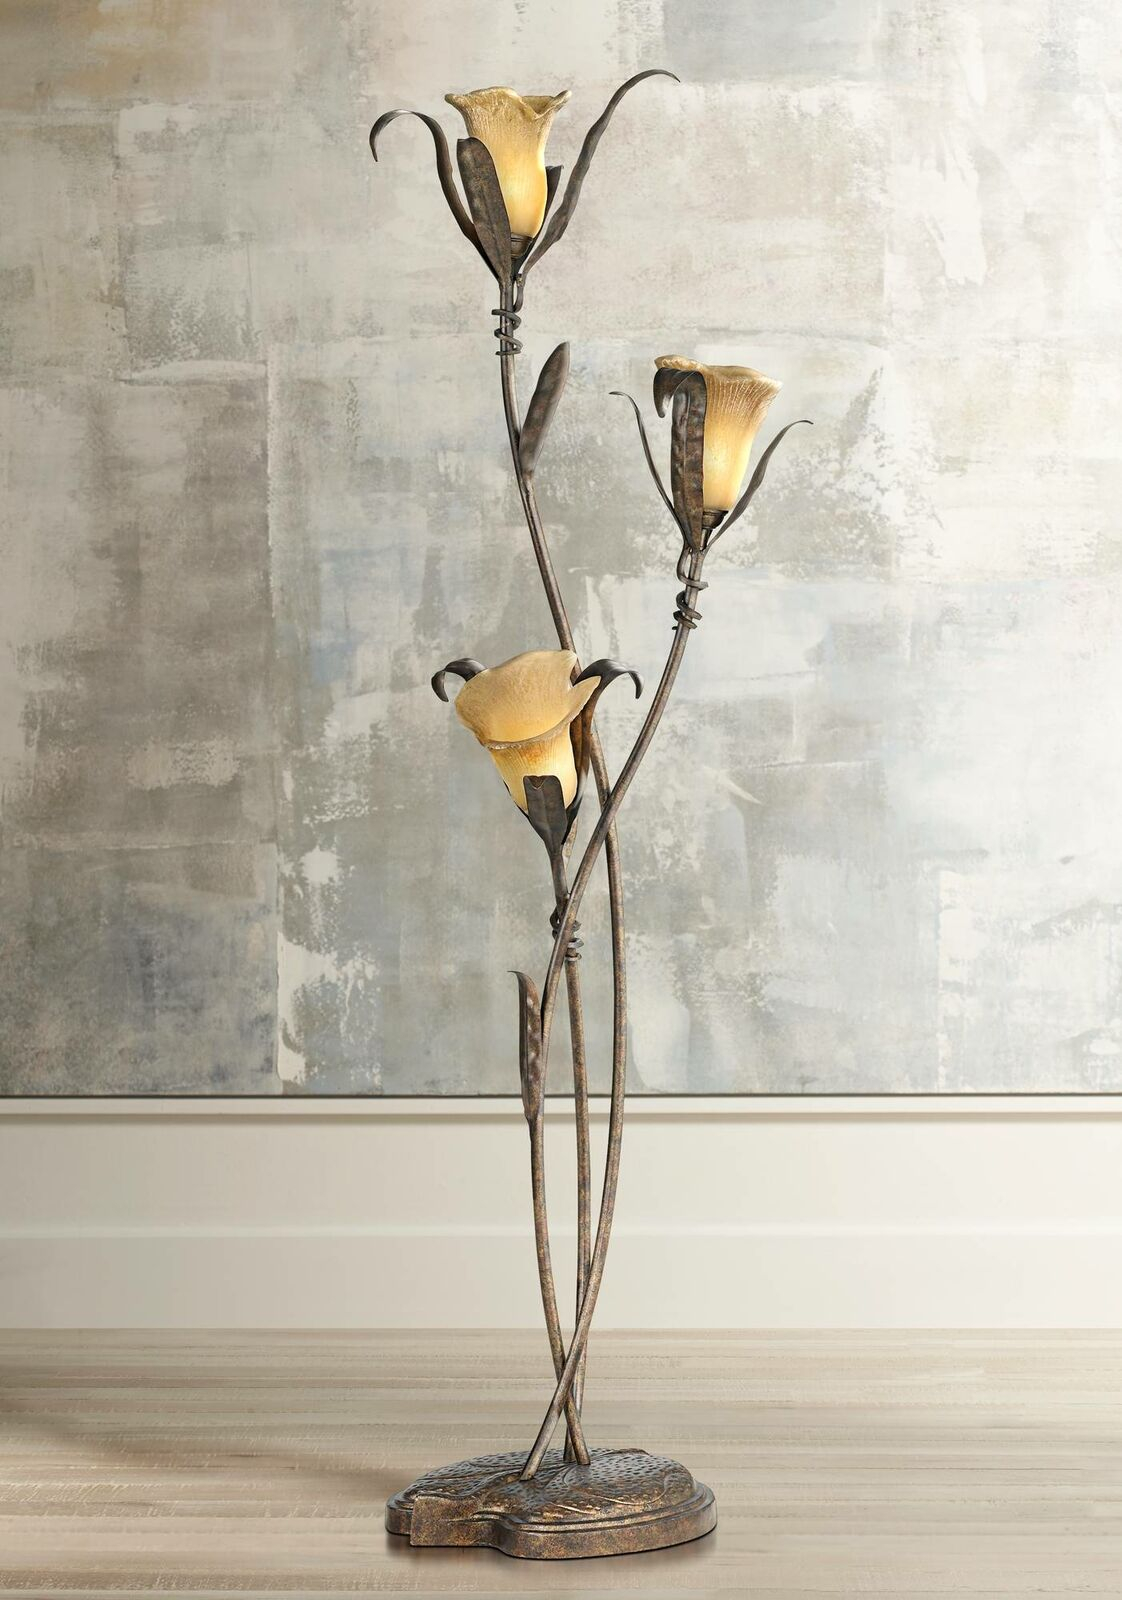 Artistic Floor Lamp Bronze Lily Shaped Glass Flower Lights For Living Room Dcor in sizing 1122 X 1600